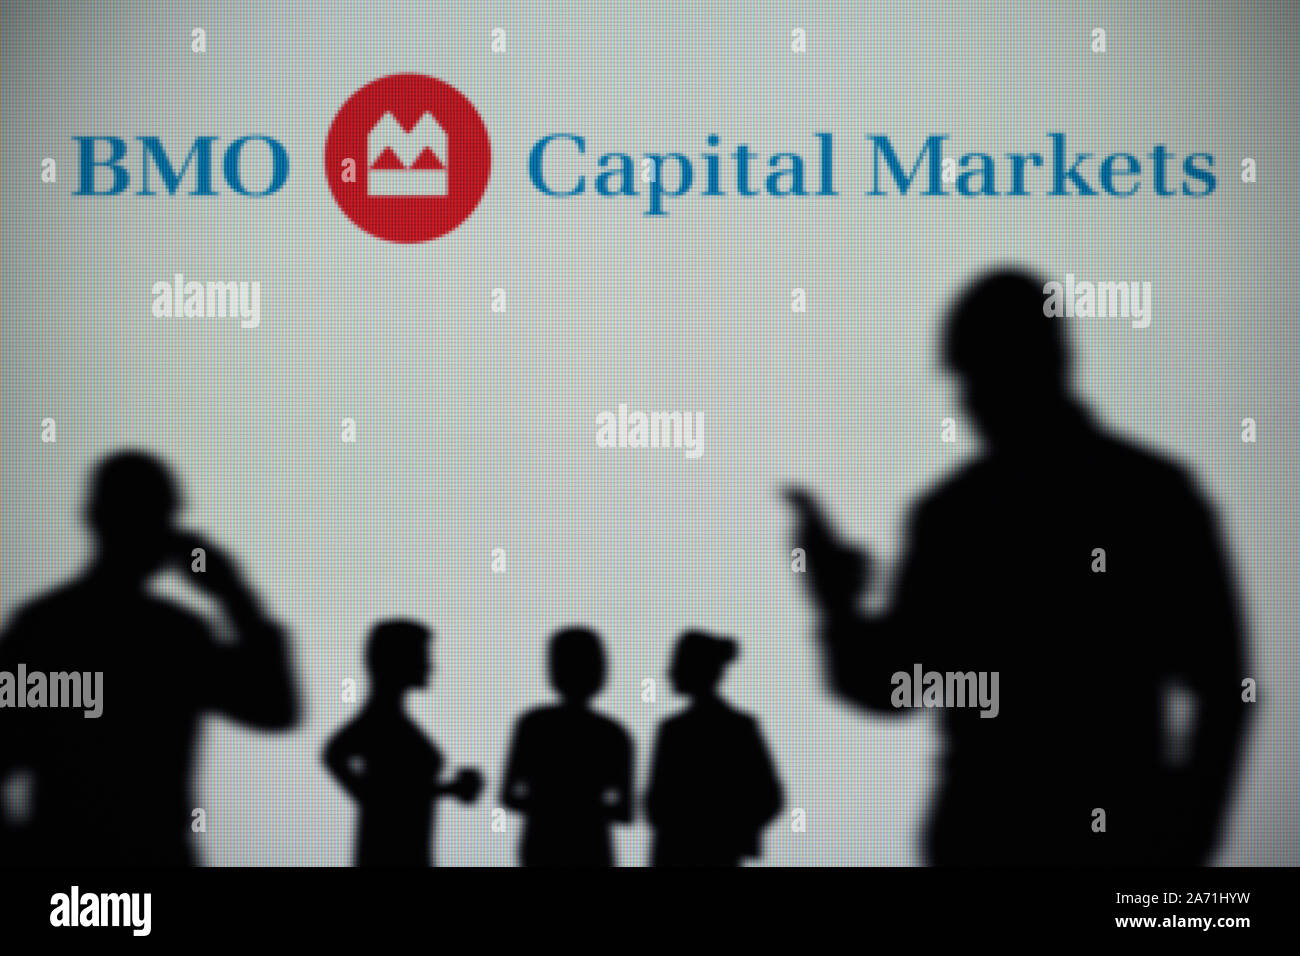 The BMO Capital Markets logo is seen on an LED screen in the background while a silhouetted person uses a smartphone (Editorial use only) Stock Photo